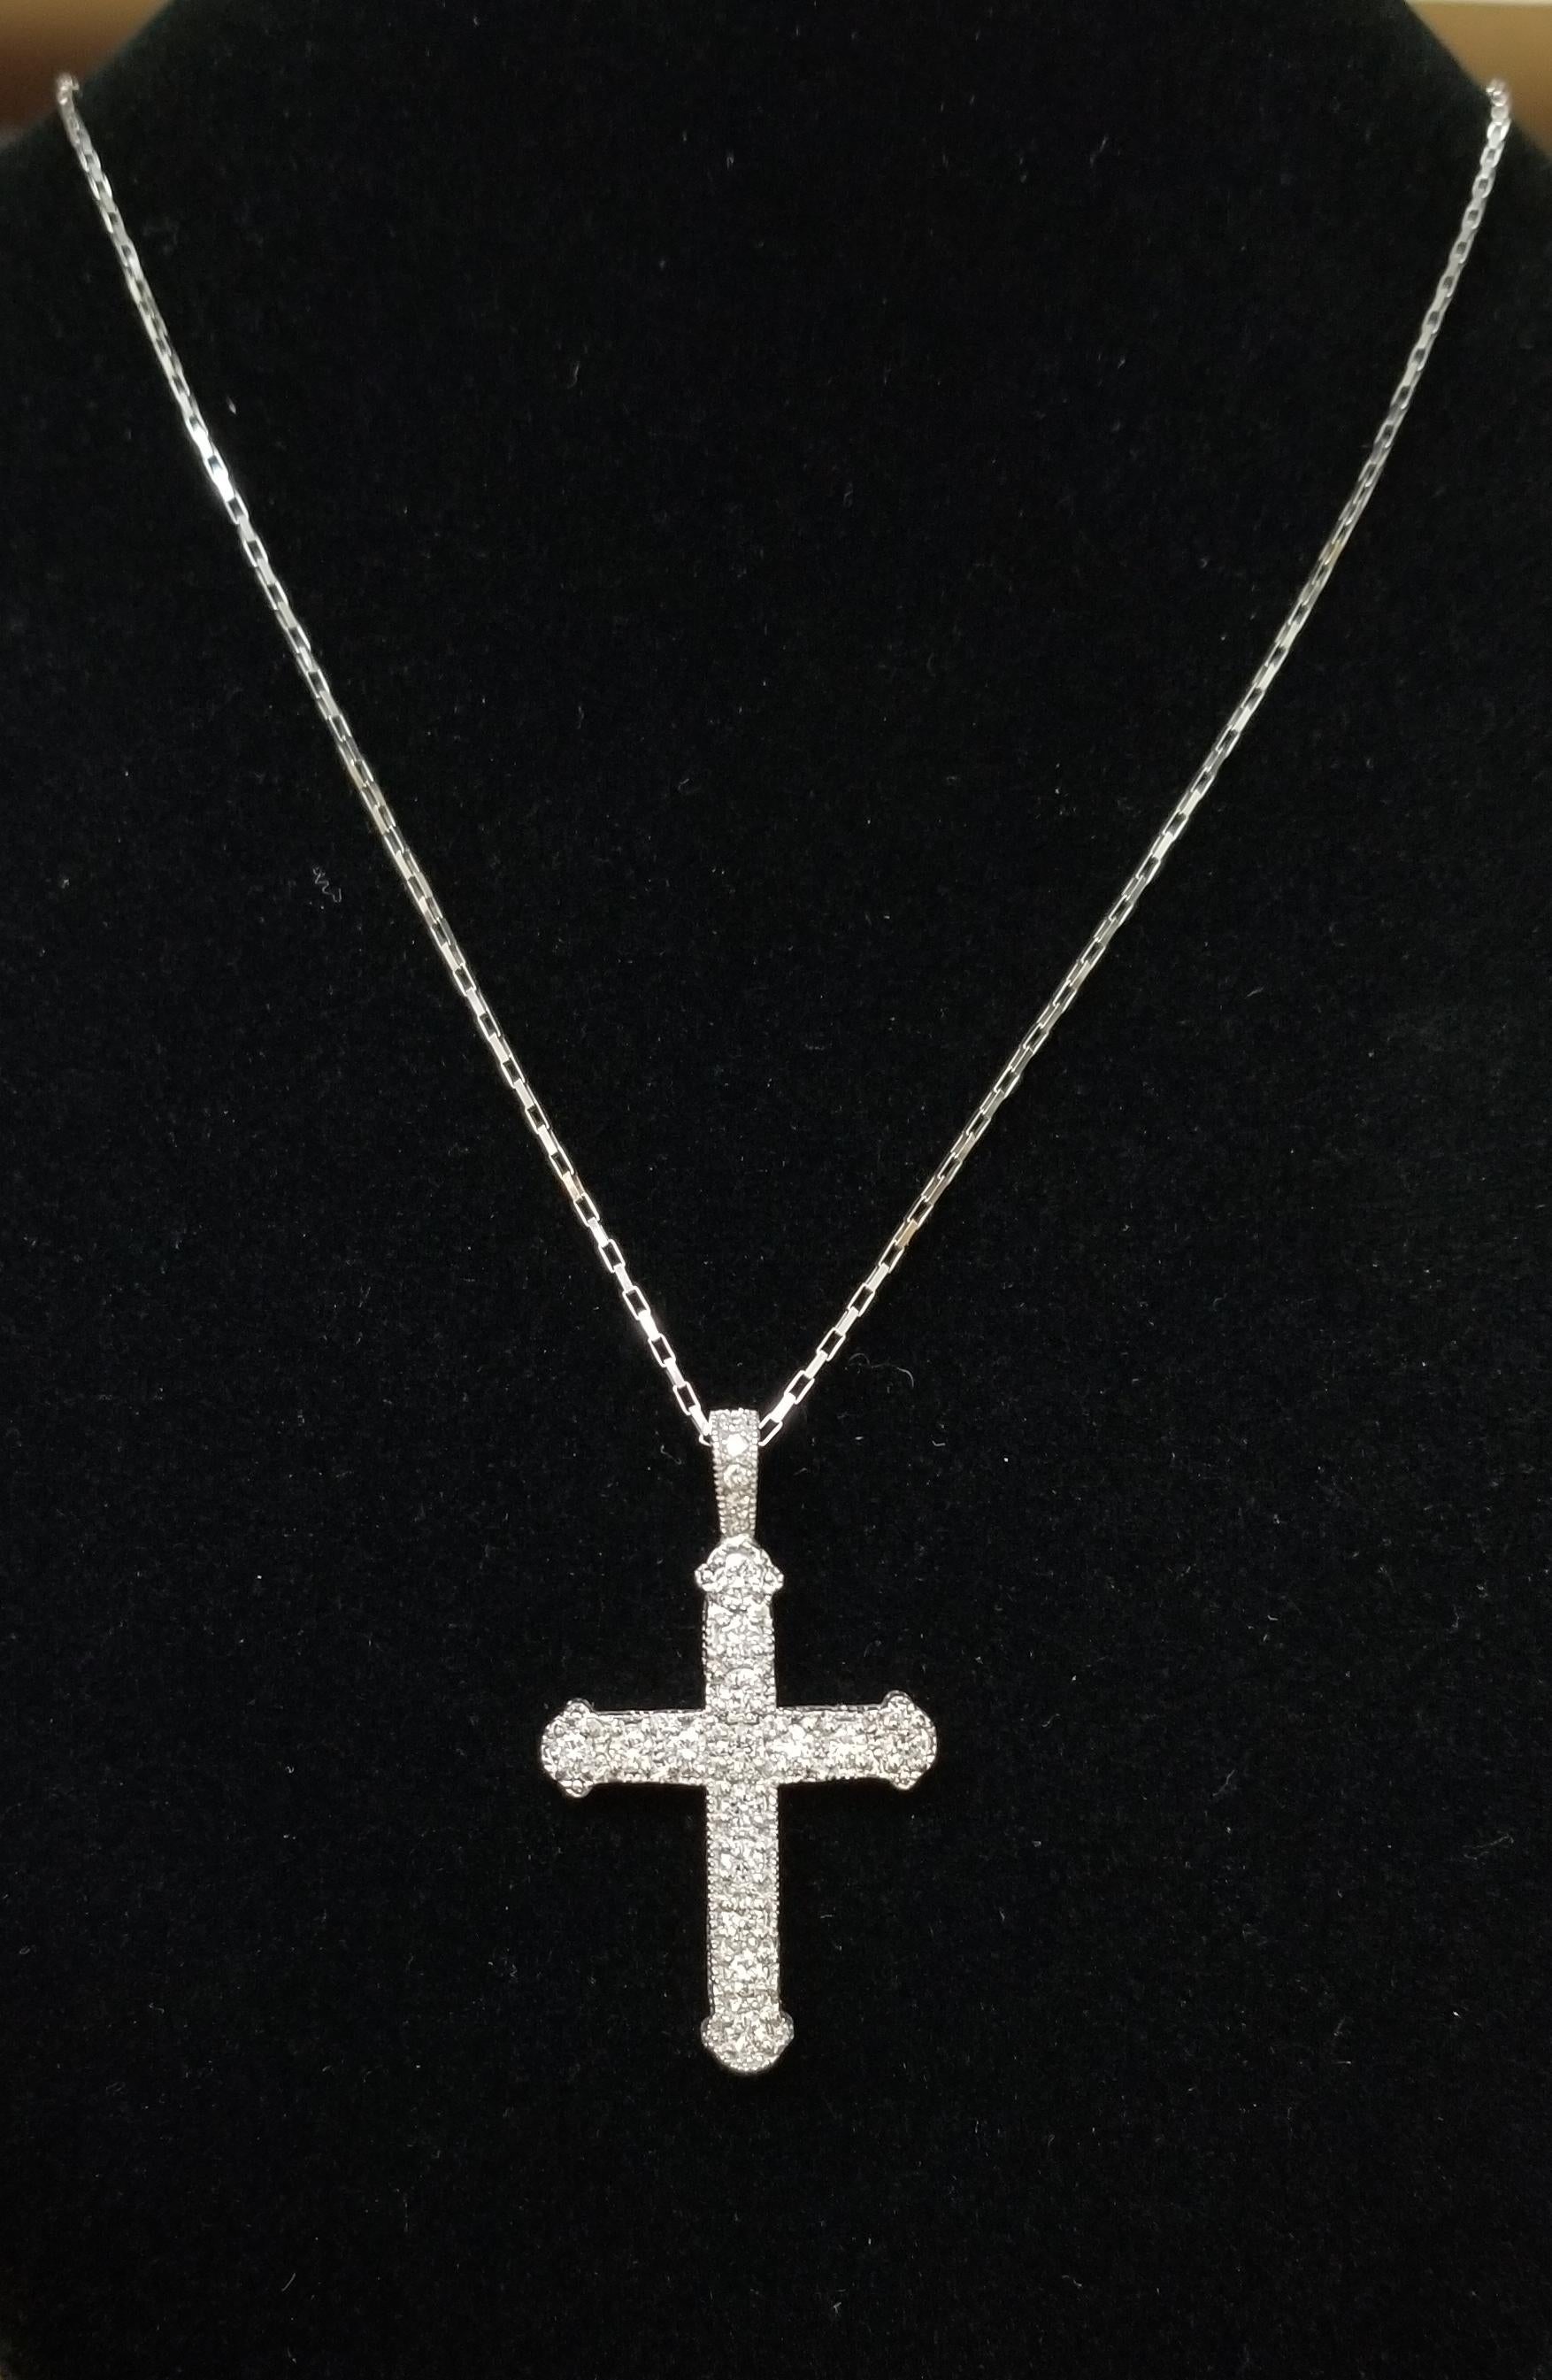 14k white gold diamond cross, containing 20 round diamonds of fine quality weighing 1.50ct. on a 20 inch elongated box chain.